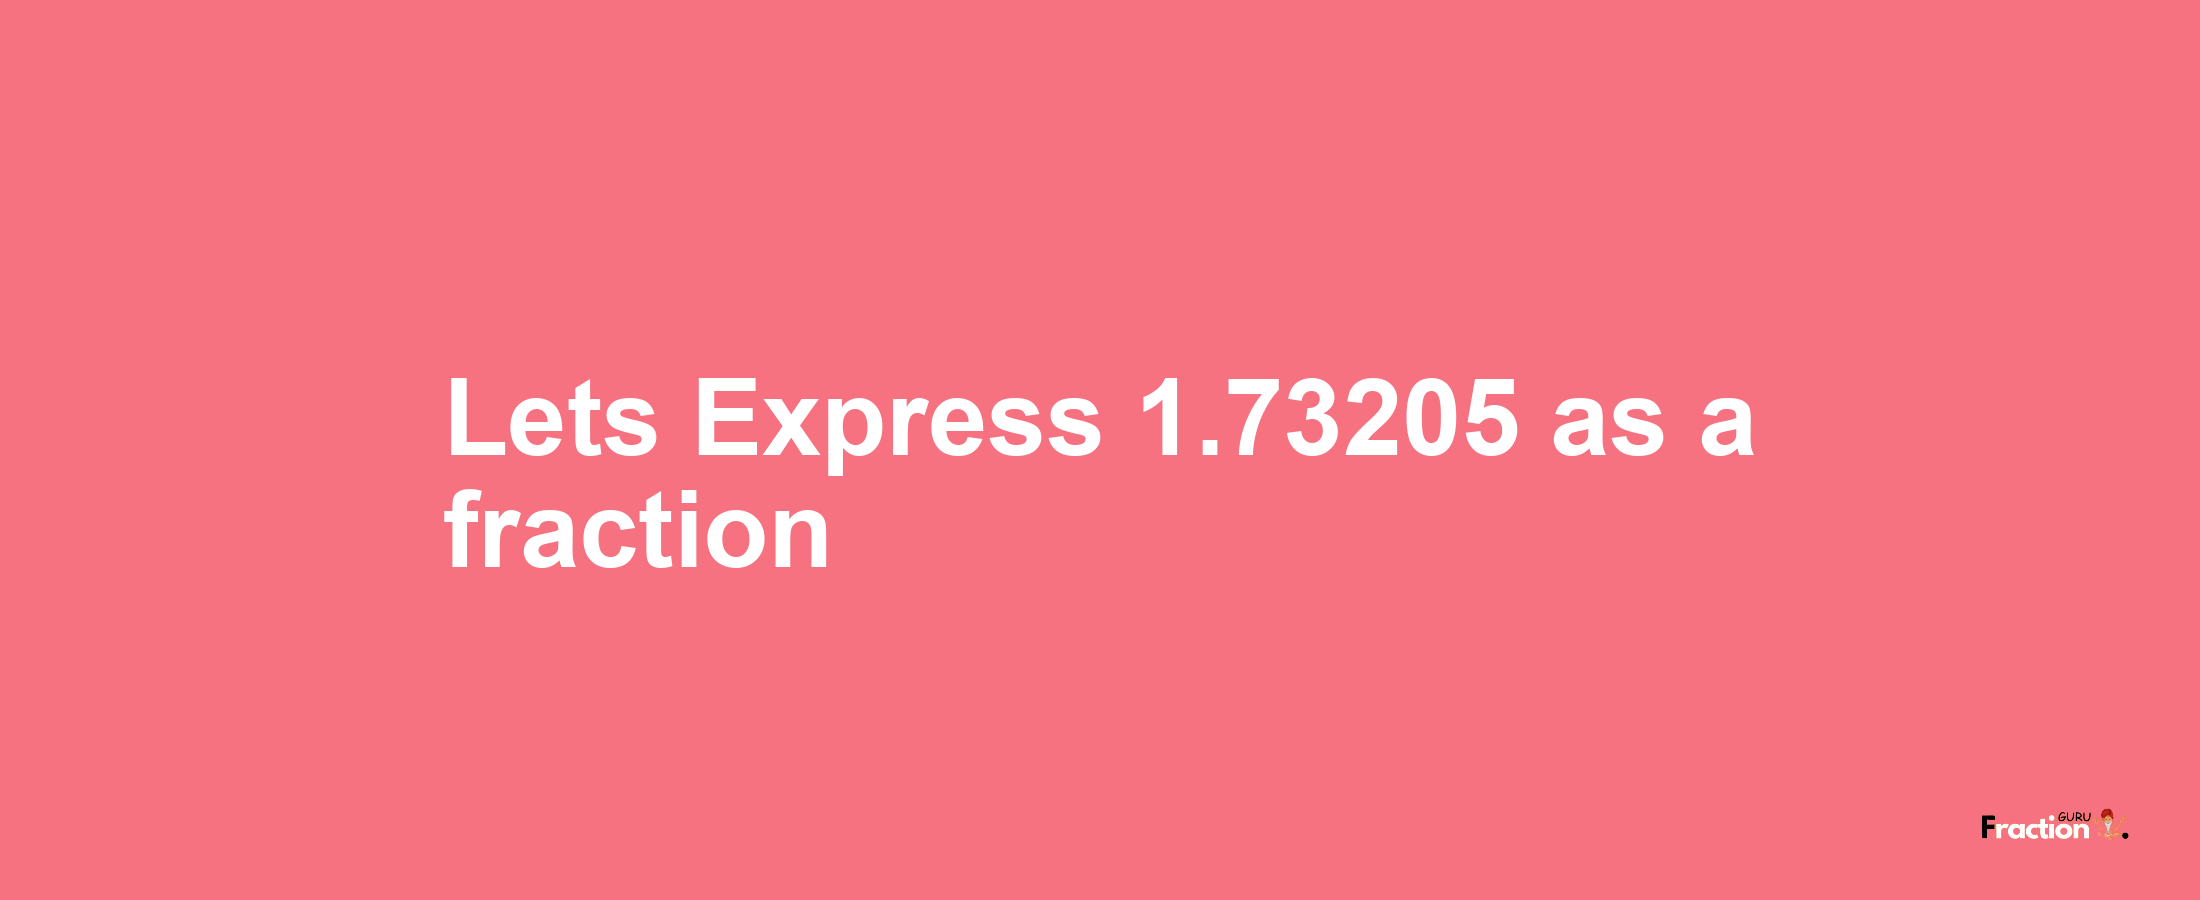 Lets Express 1.73205 as afraction